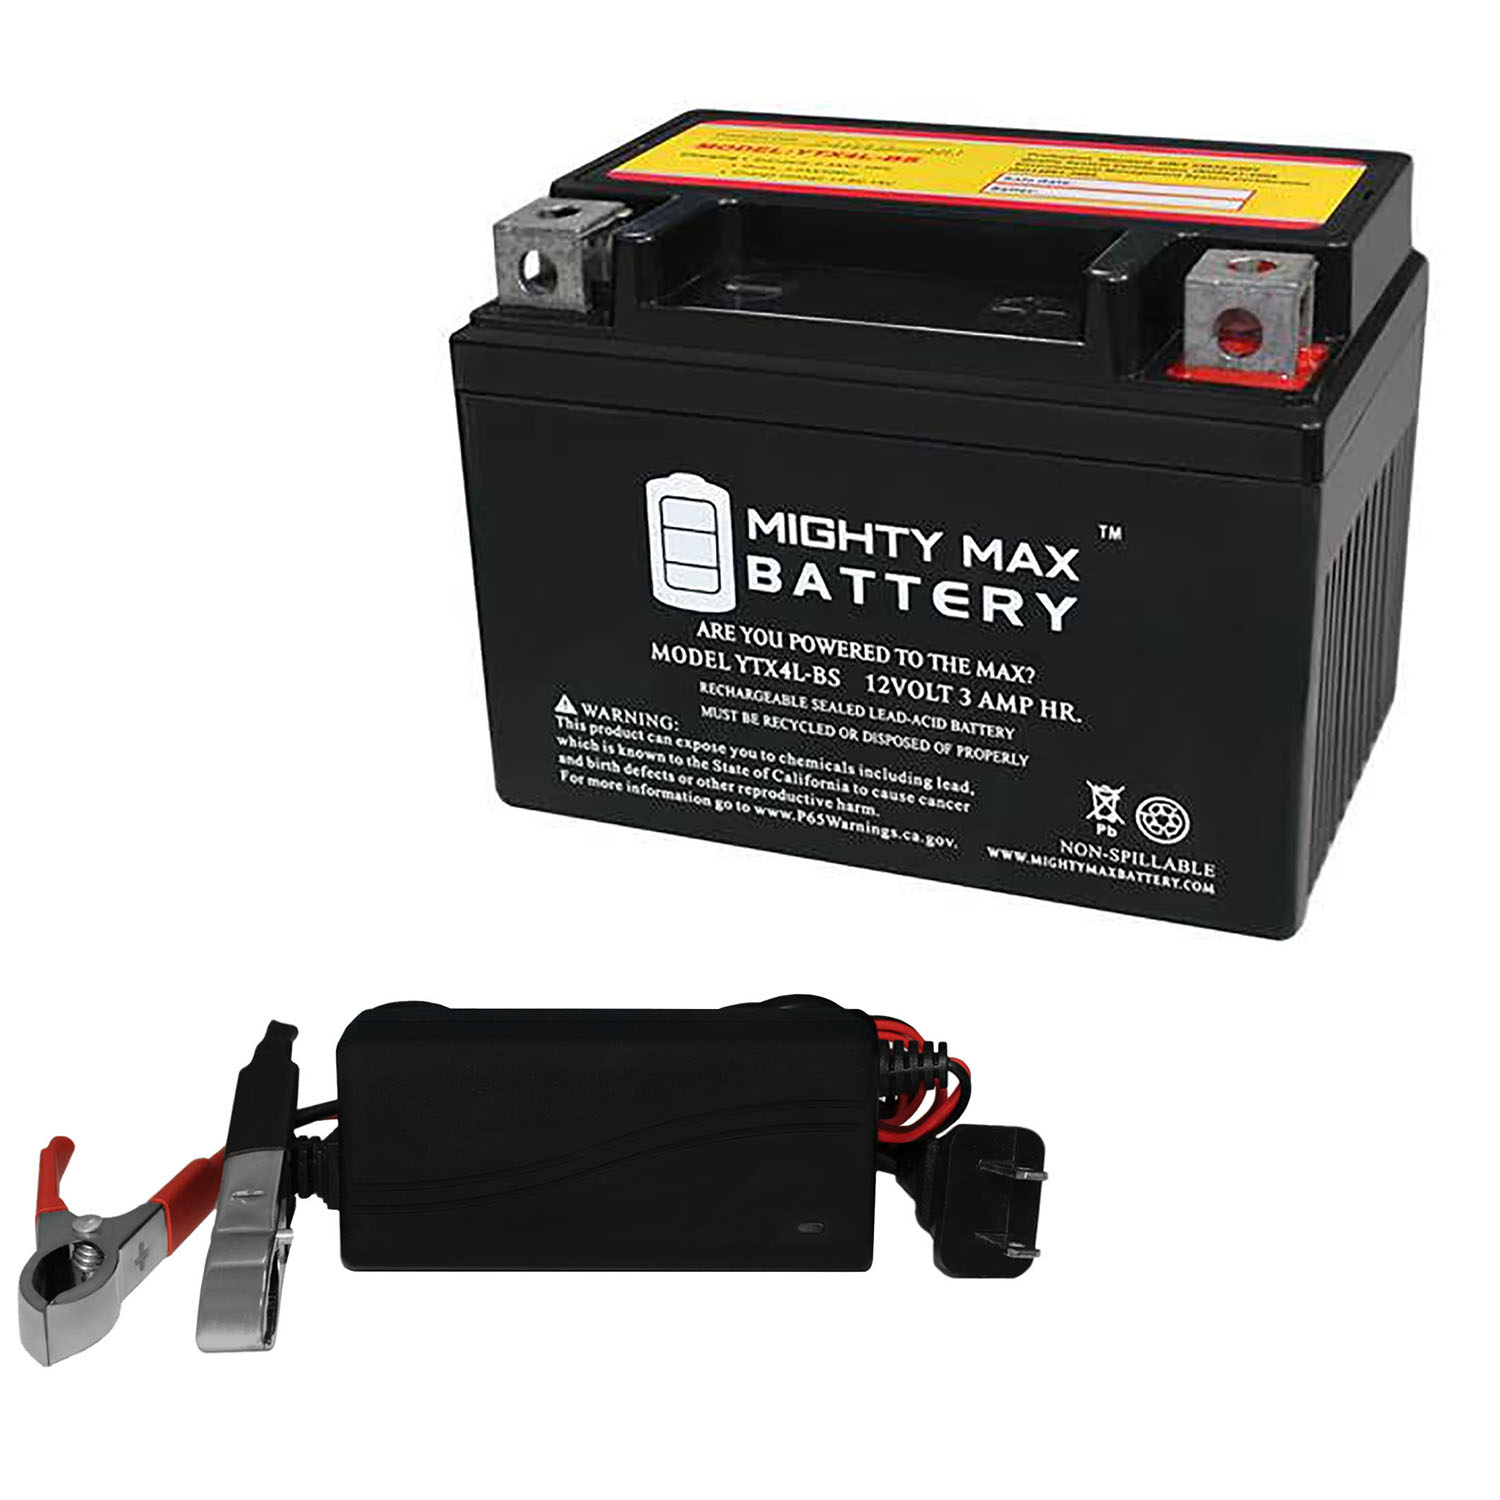 Mighty Max Battery YTX4L-BS 12V 3AH Replaces 86-87 Yamaha CE50 + 12V 1AMP Charger